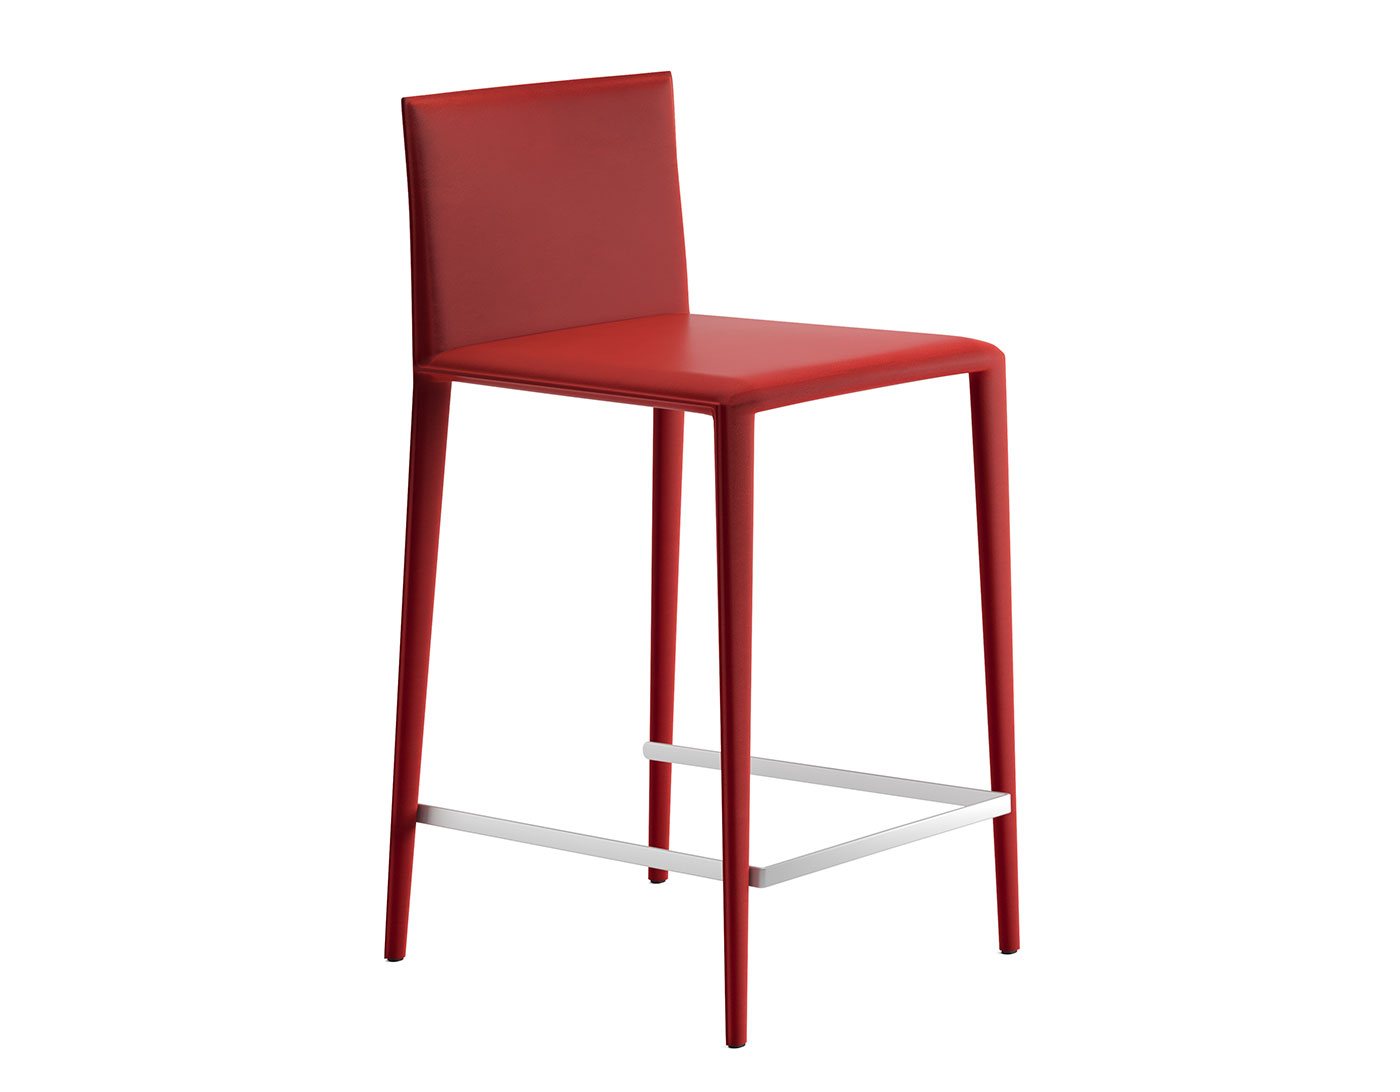 Norma Stool by Lievore Altherr Molina for Arper | hive